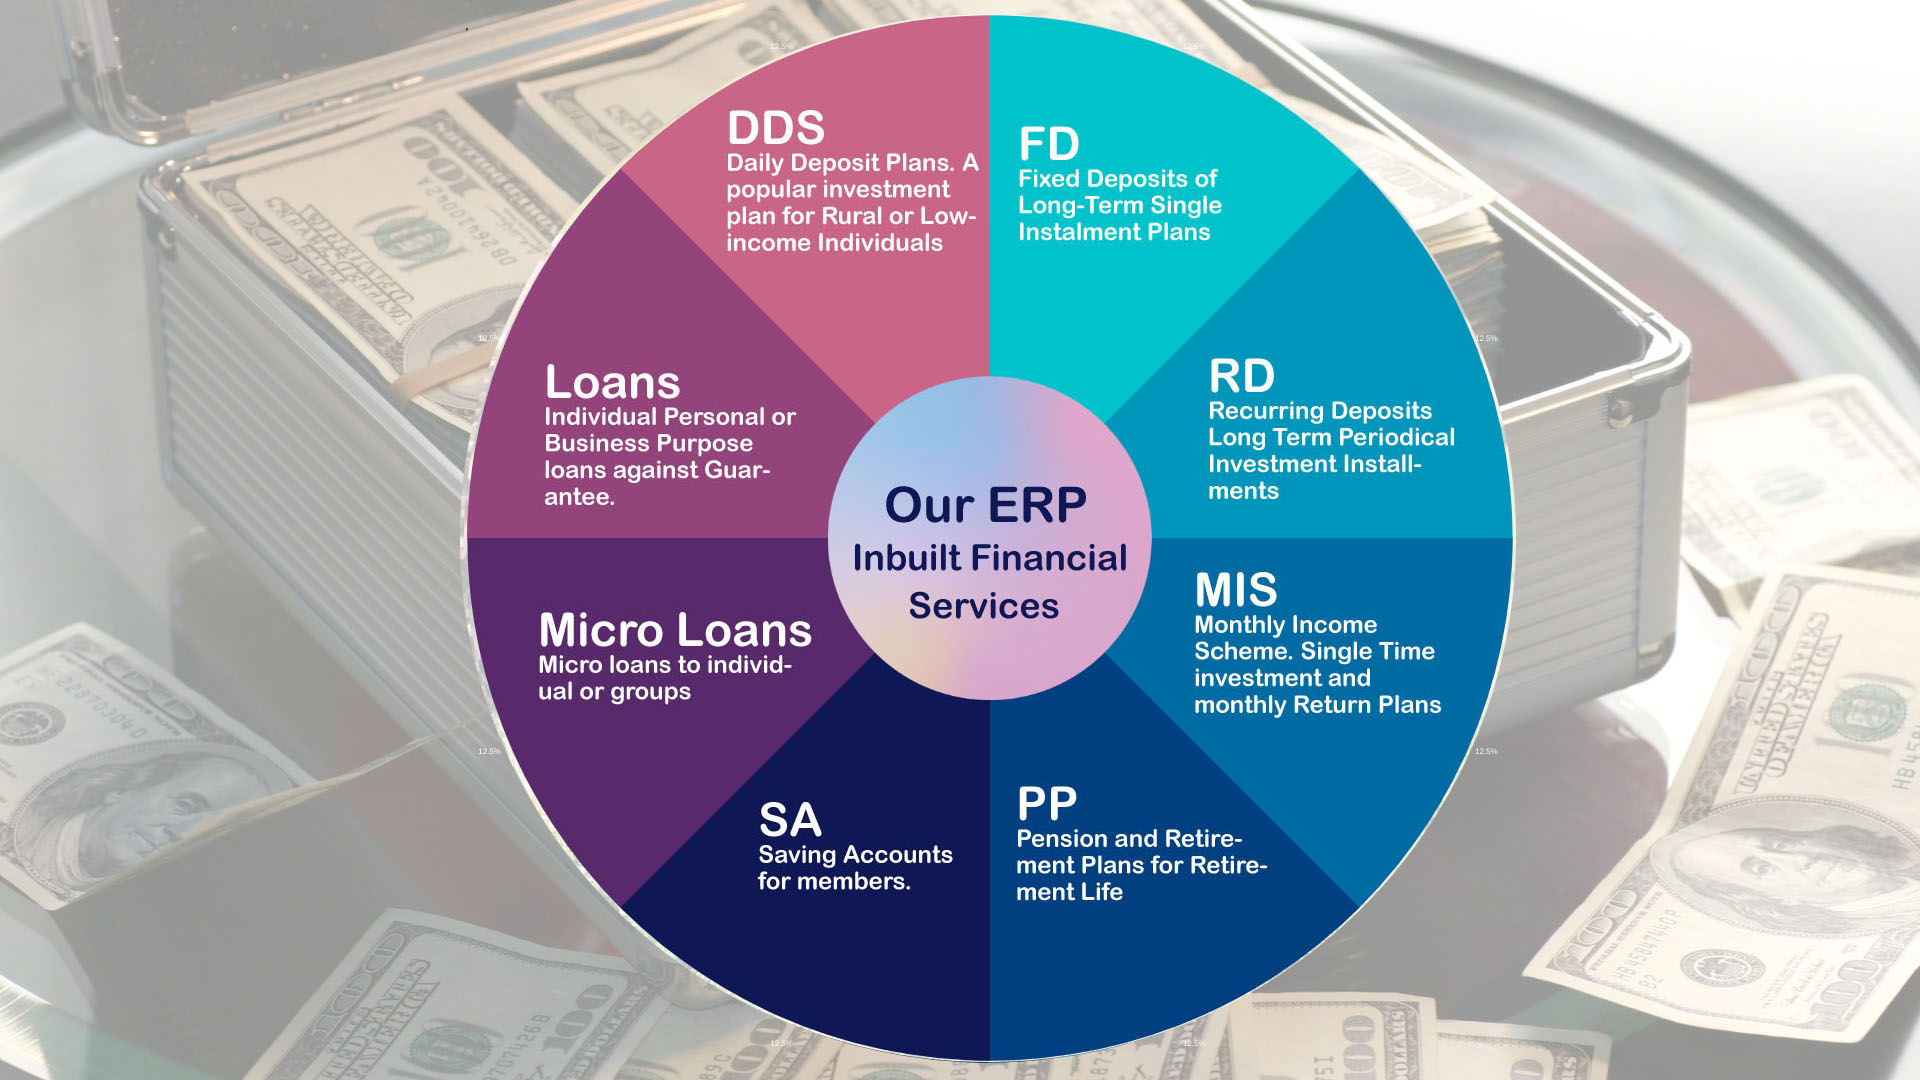 One ERP caters your all financial Offering to your members